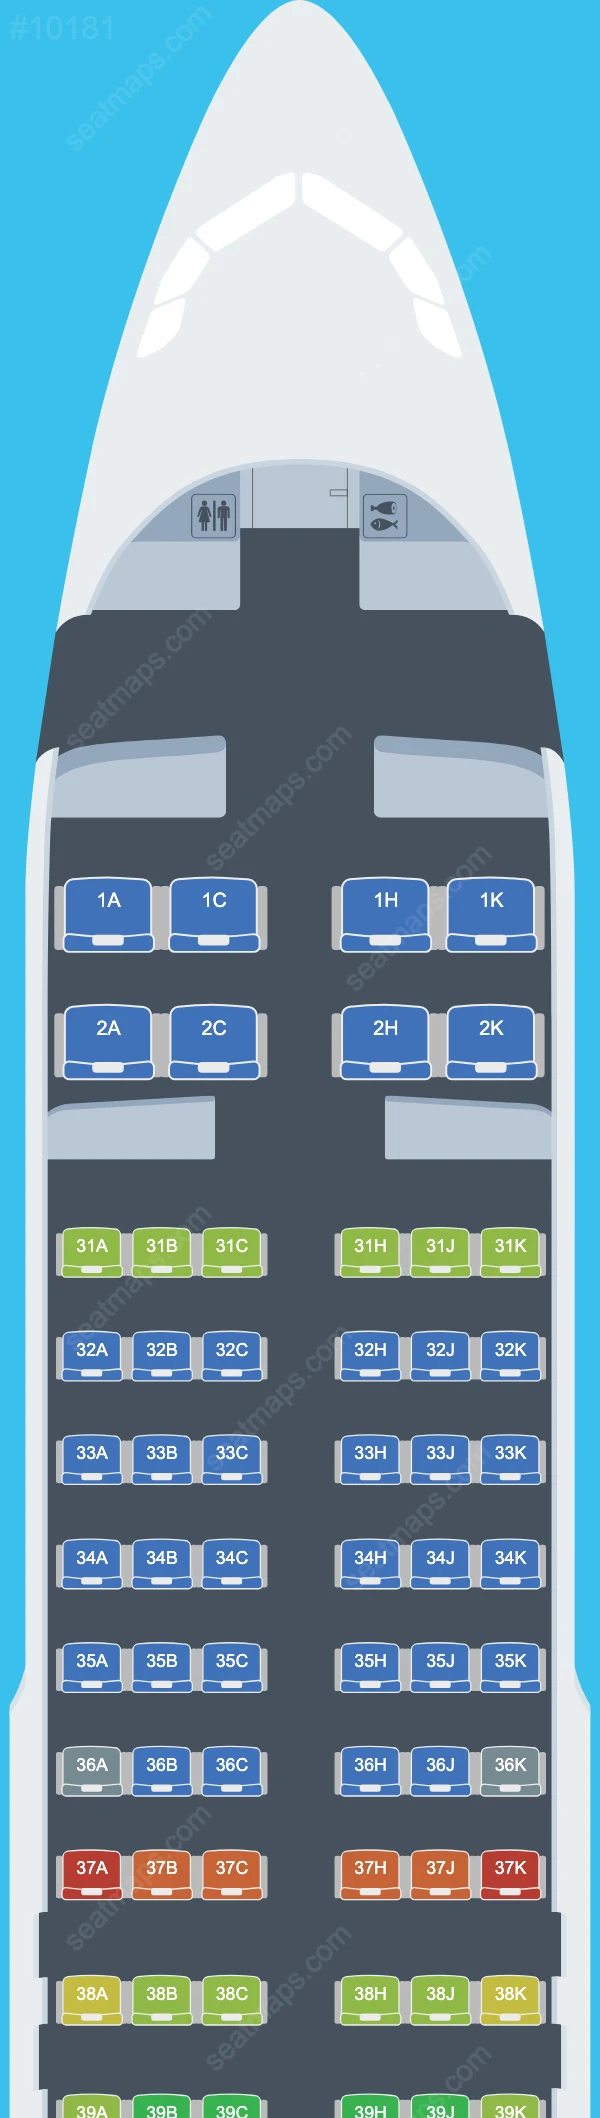 Juneyao Air Airbus A320 Seat Maps A320-200neo